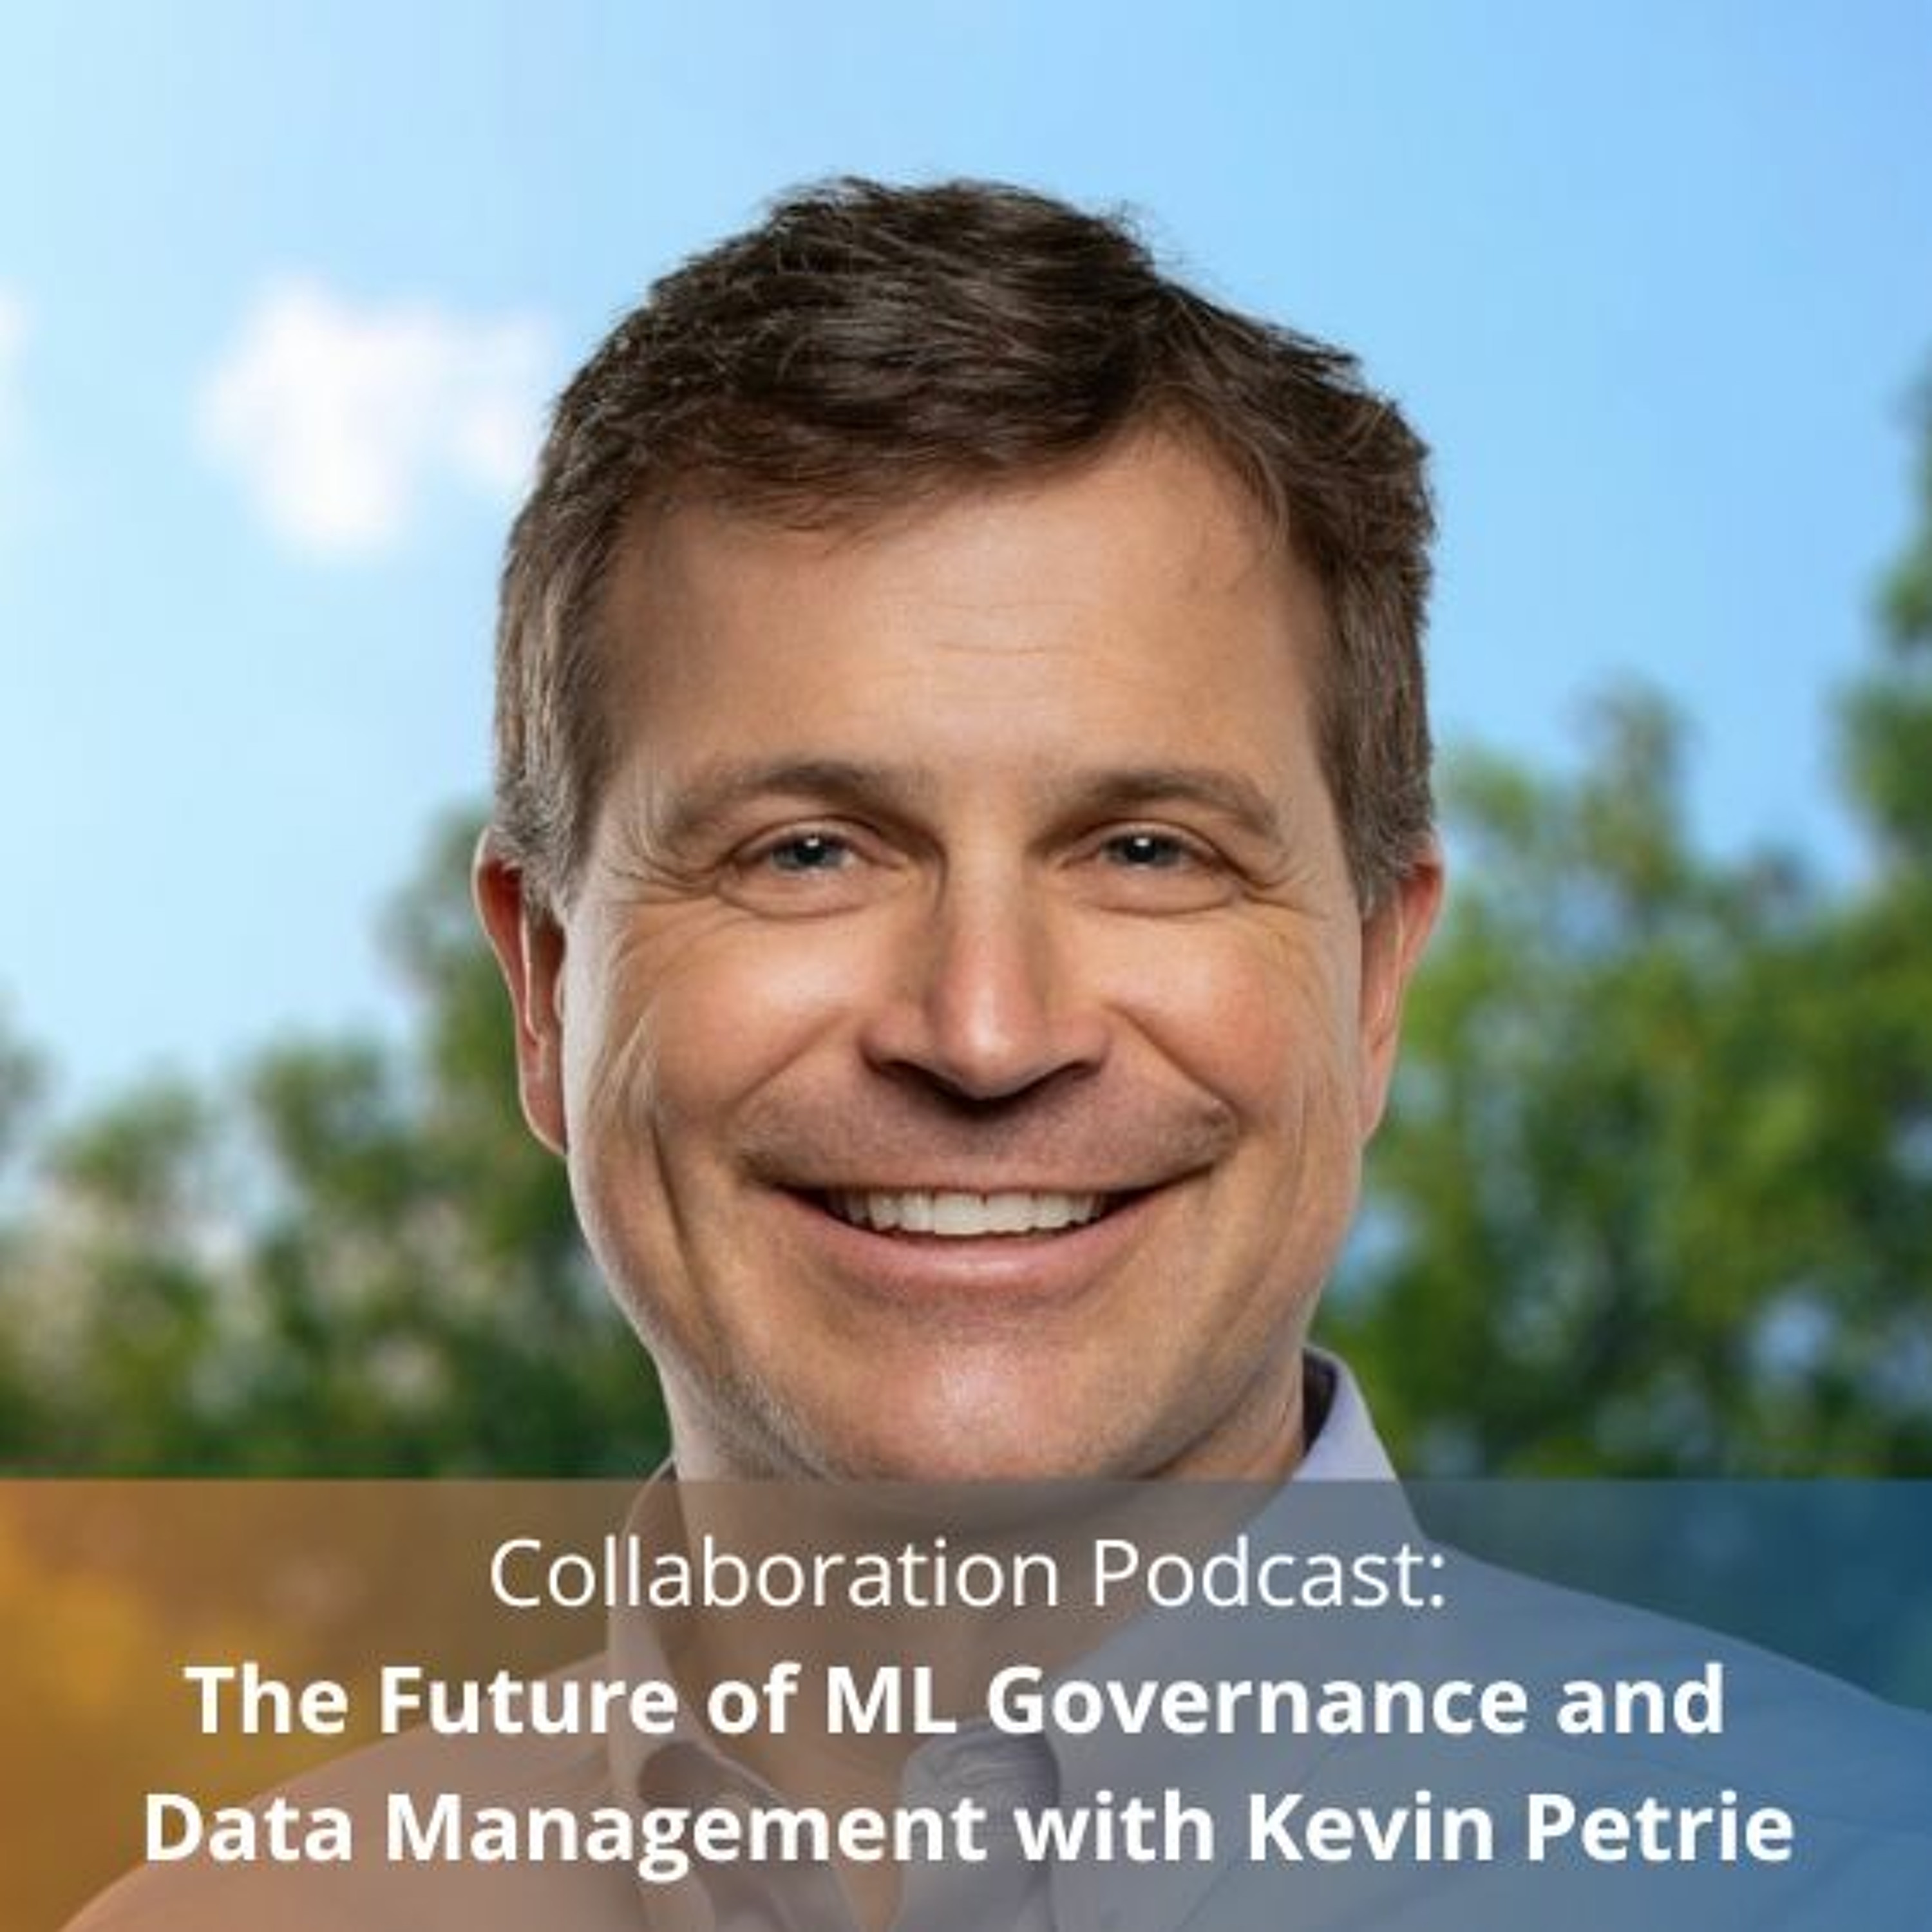 Collaboration Podcast: The Future of ML Governance and Data Management with Kevin Petrie